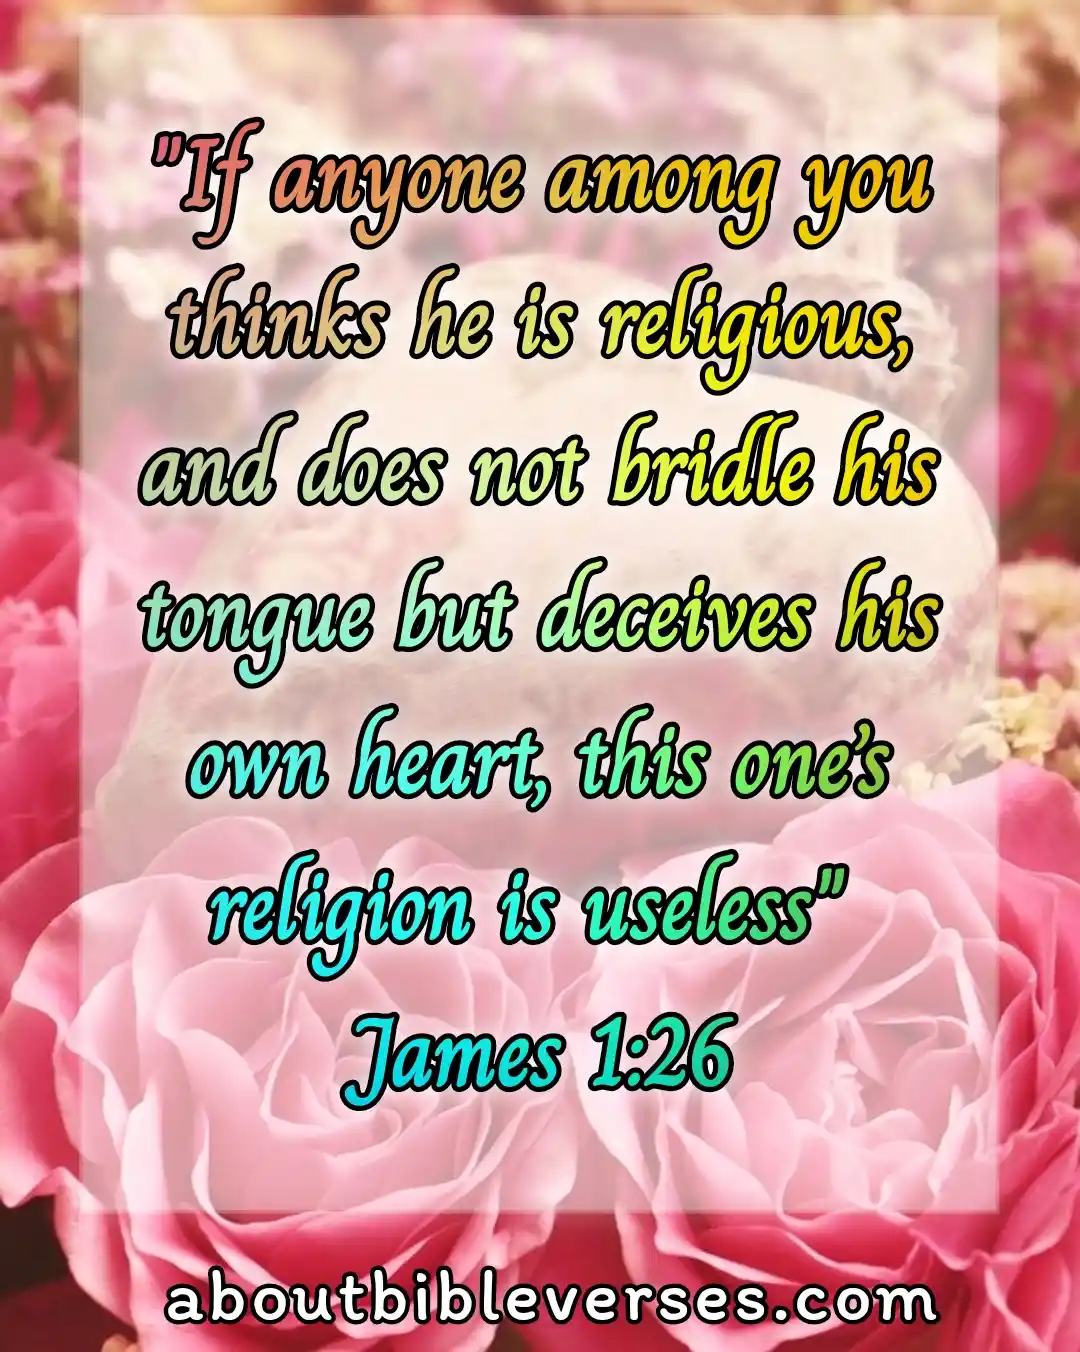 Bible Verses About Gossip And Drama (James 1:26)